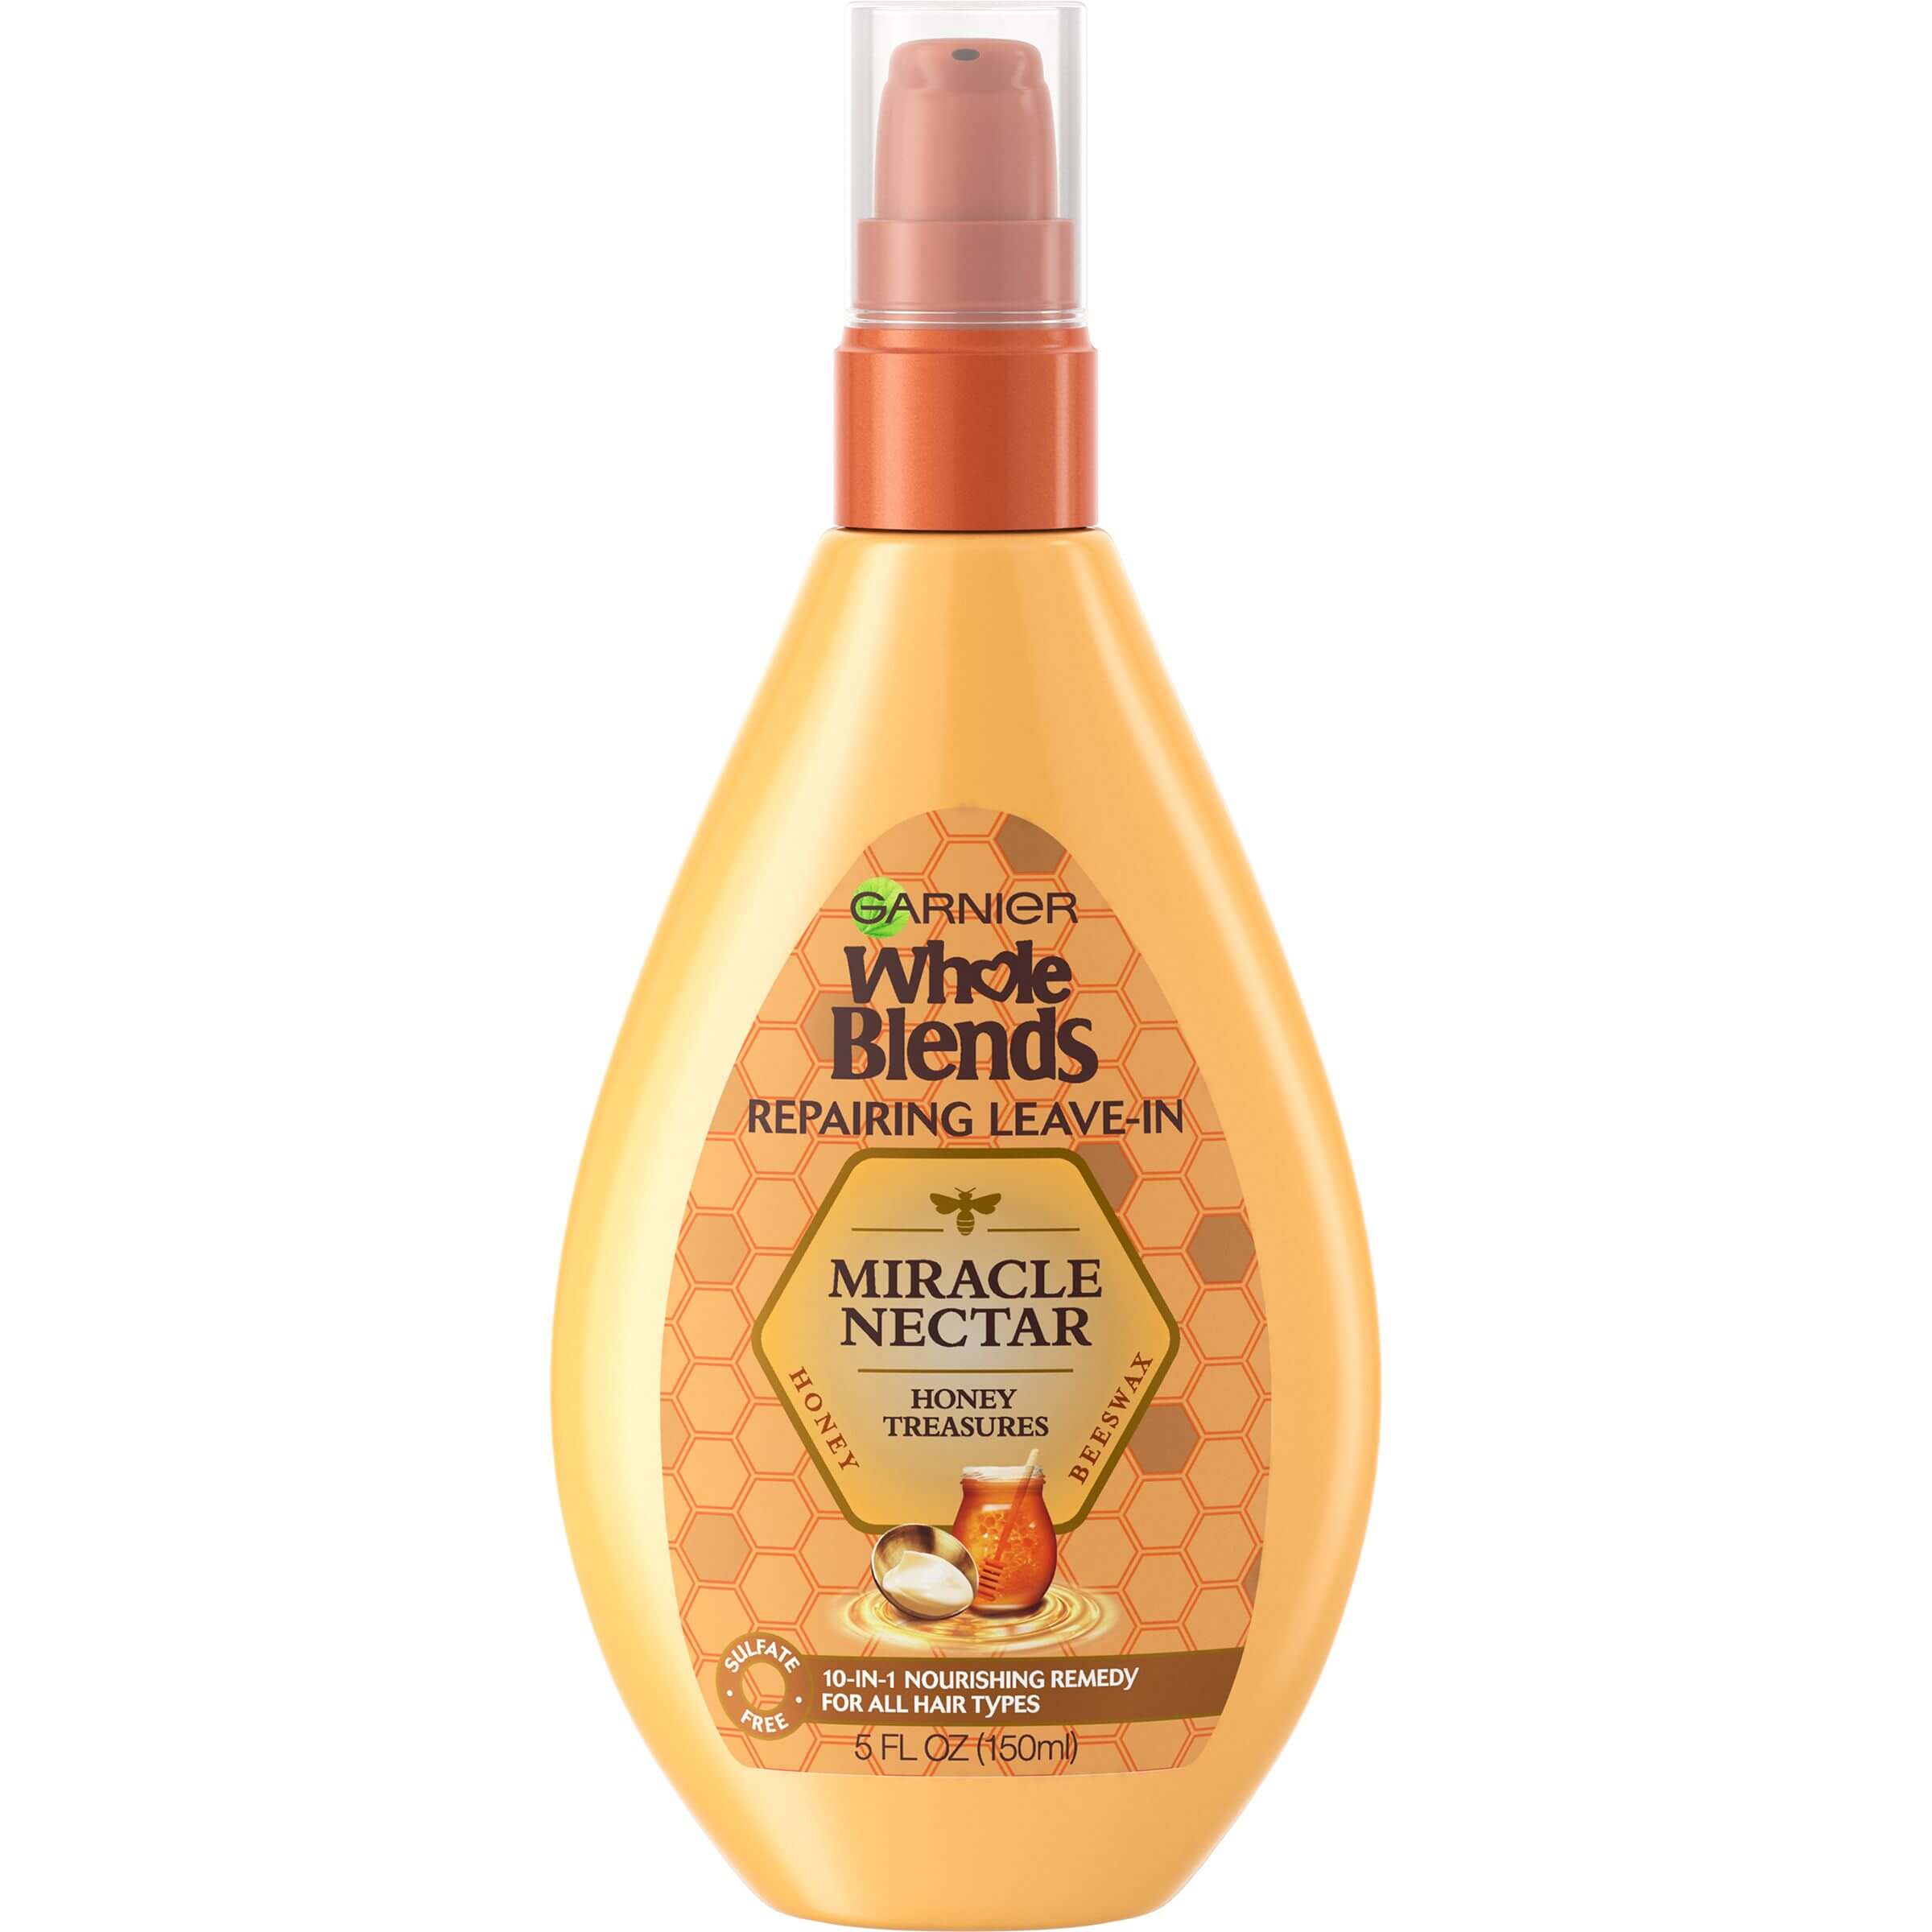 Garnier Haircare Whole Blends Honey Treasures Miracle Nectar Repairing 10-in-1 Leave-in Treatment
